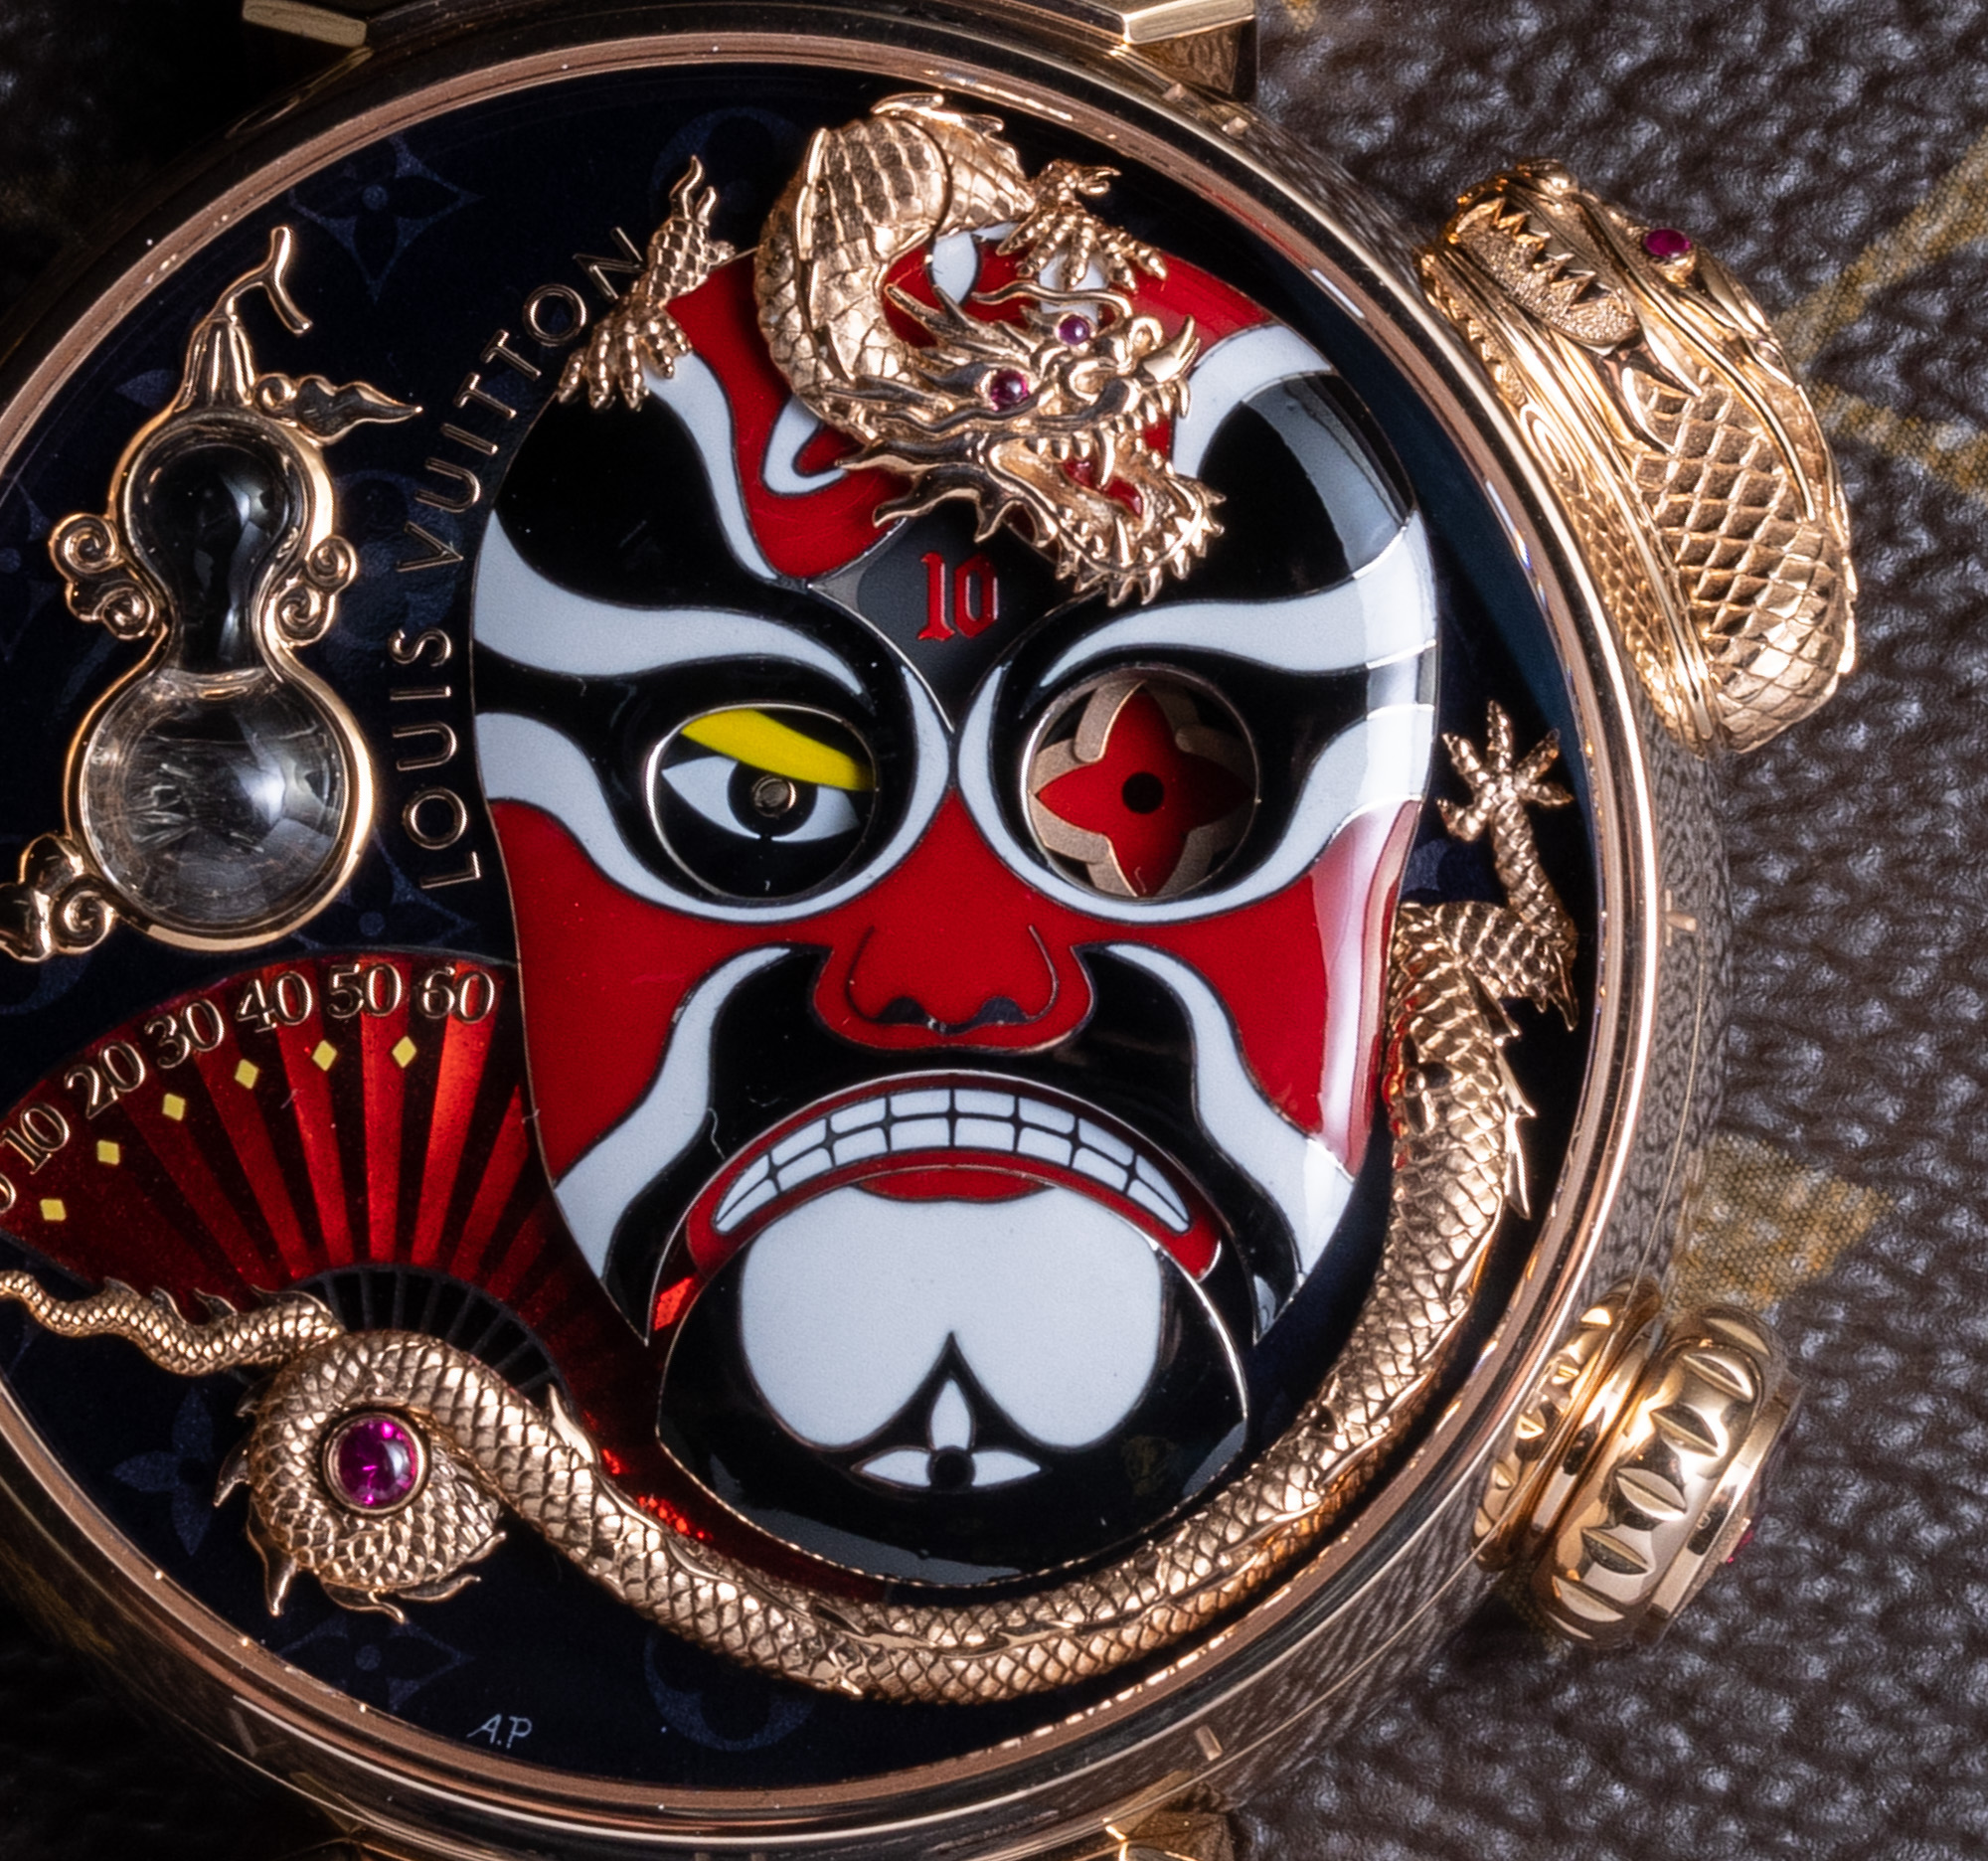 Hands-On: Louis Vuitton Tambour Opera Automata Watch With Dial